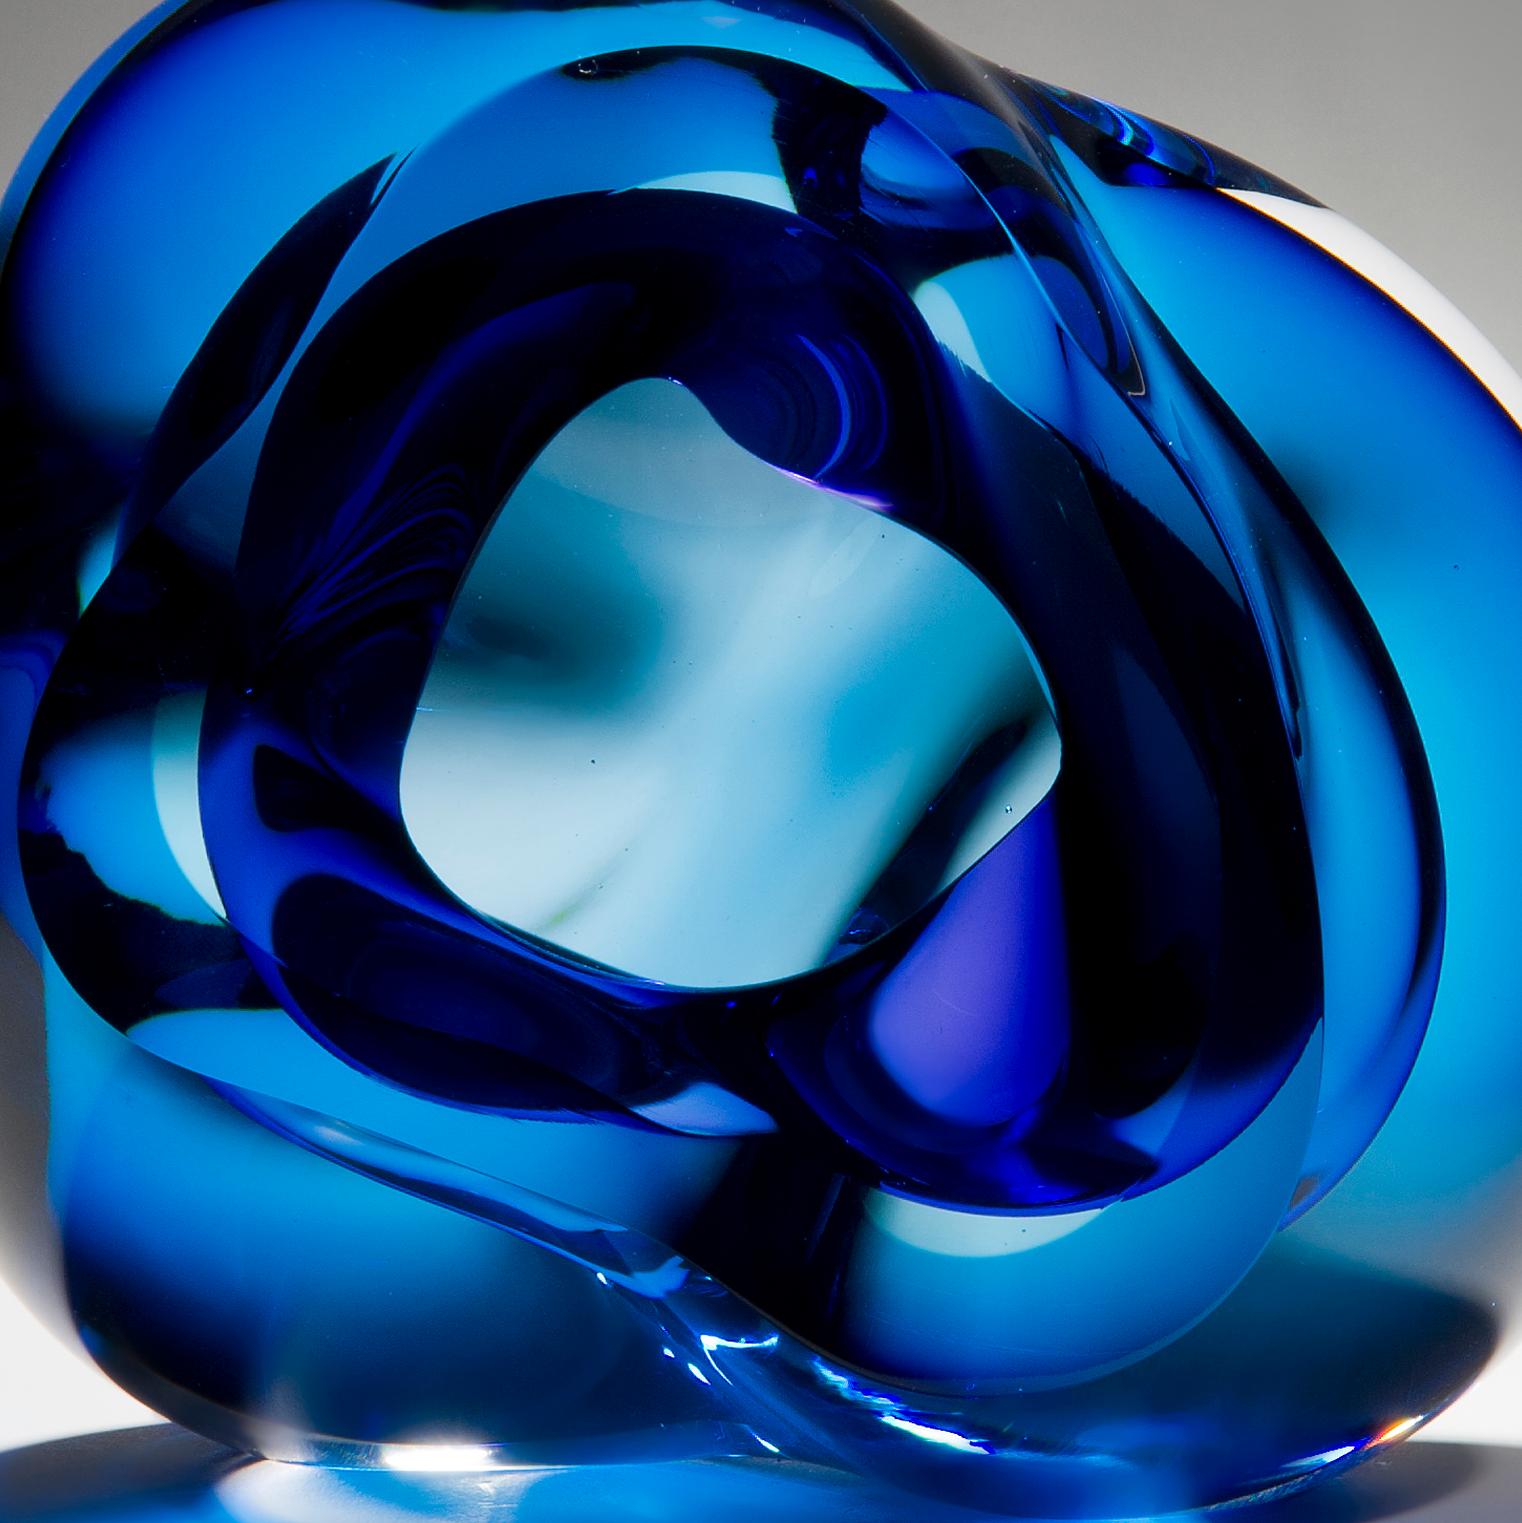 Hand-Crafted Vug in Blue and Hyacinth, a Unique Glass Sculpture by Samantha Donaldson